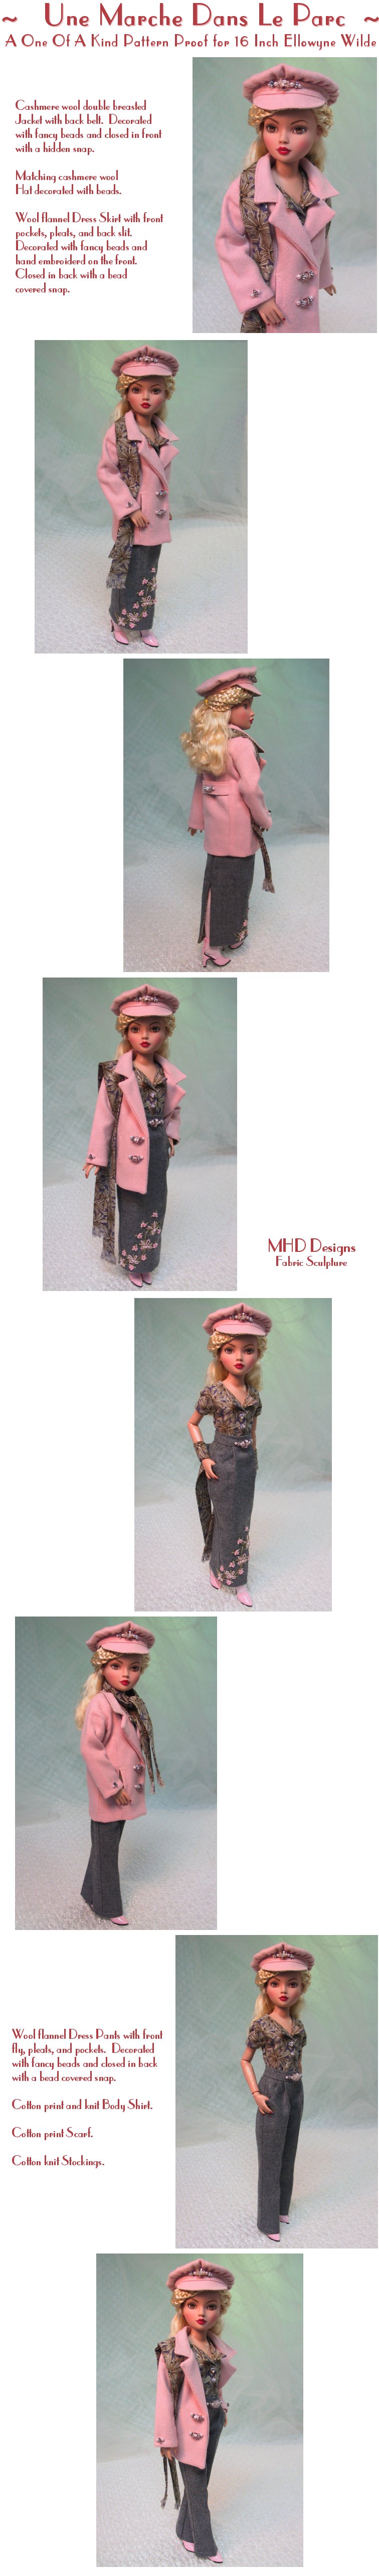 MHD Designs - A Walk In The Park - a One Of A Kind Pattern Proof - High Resolution Photographs, your patience is appreciated!